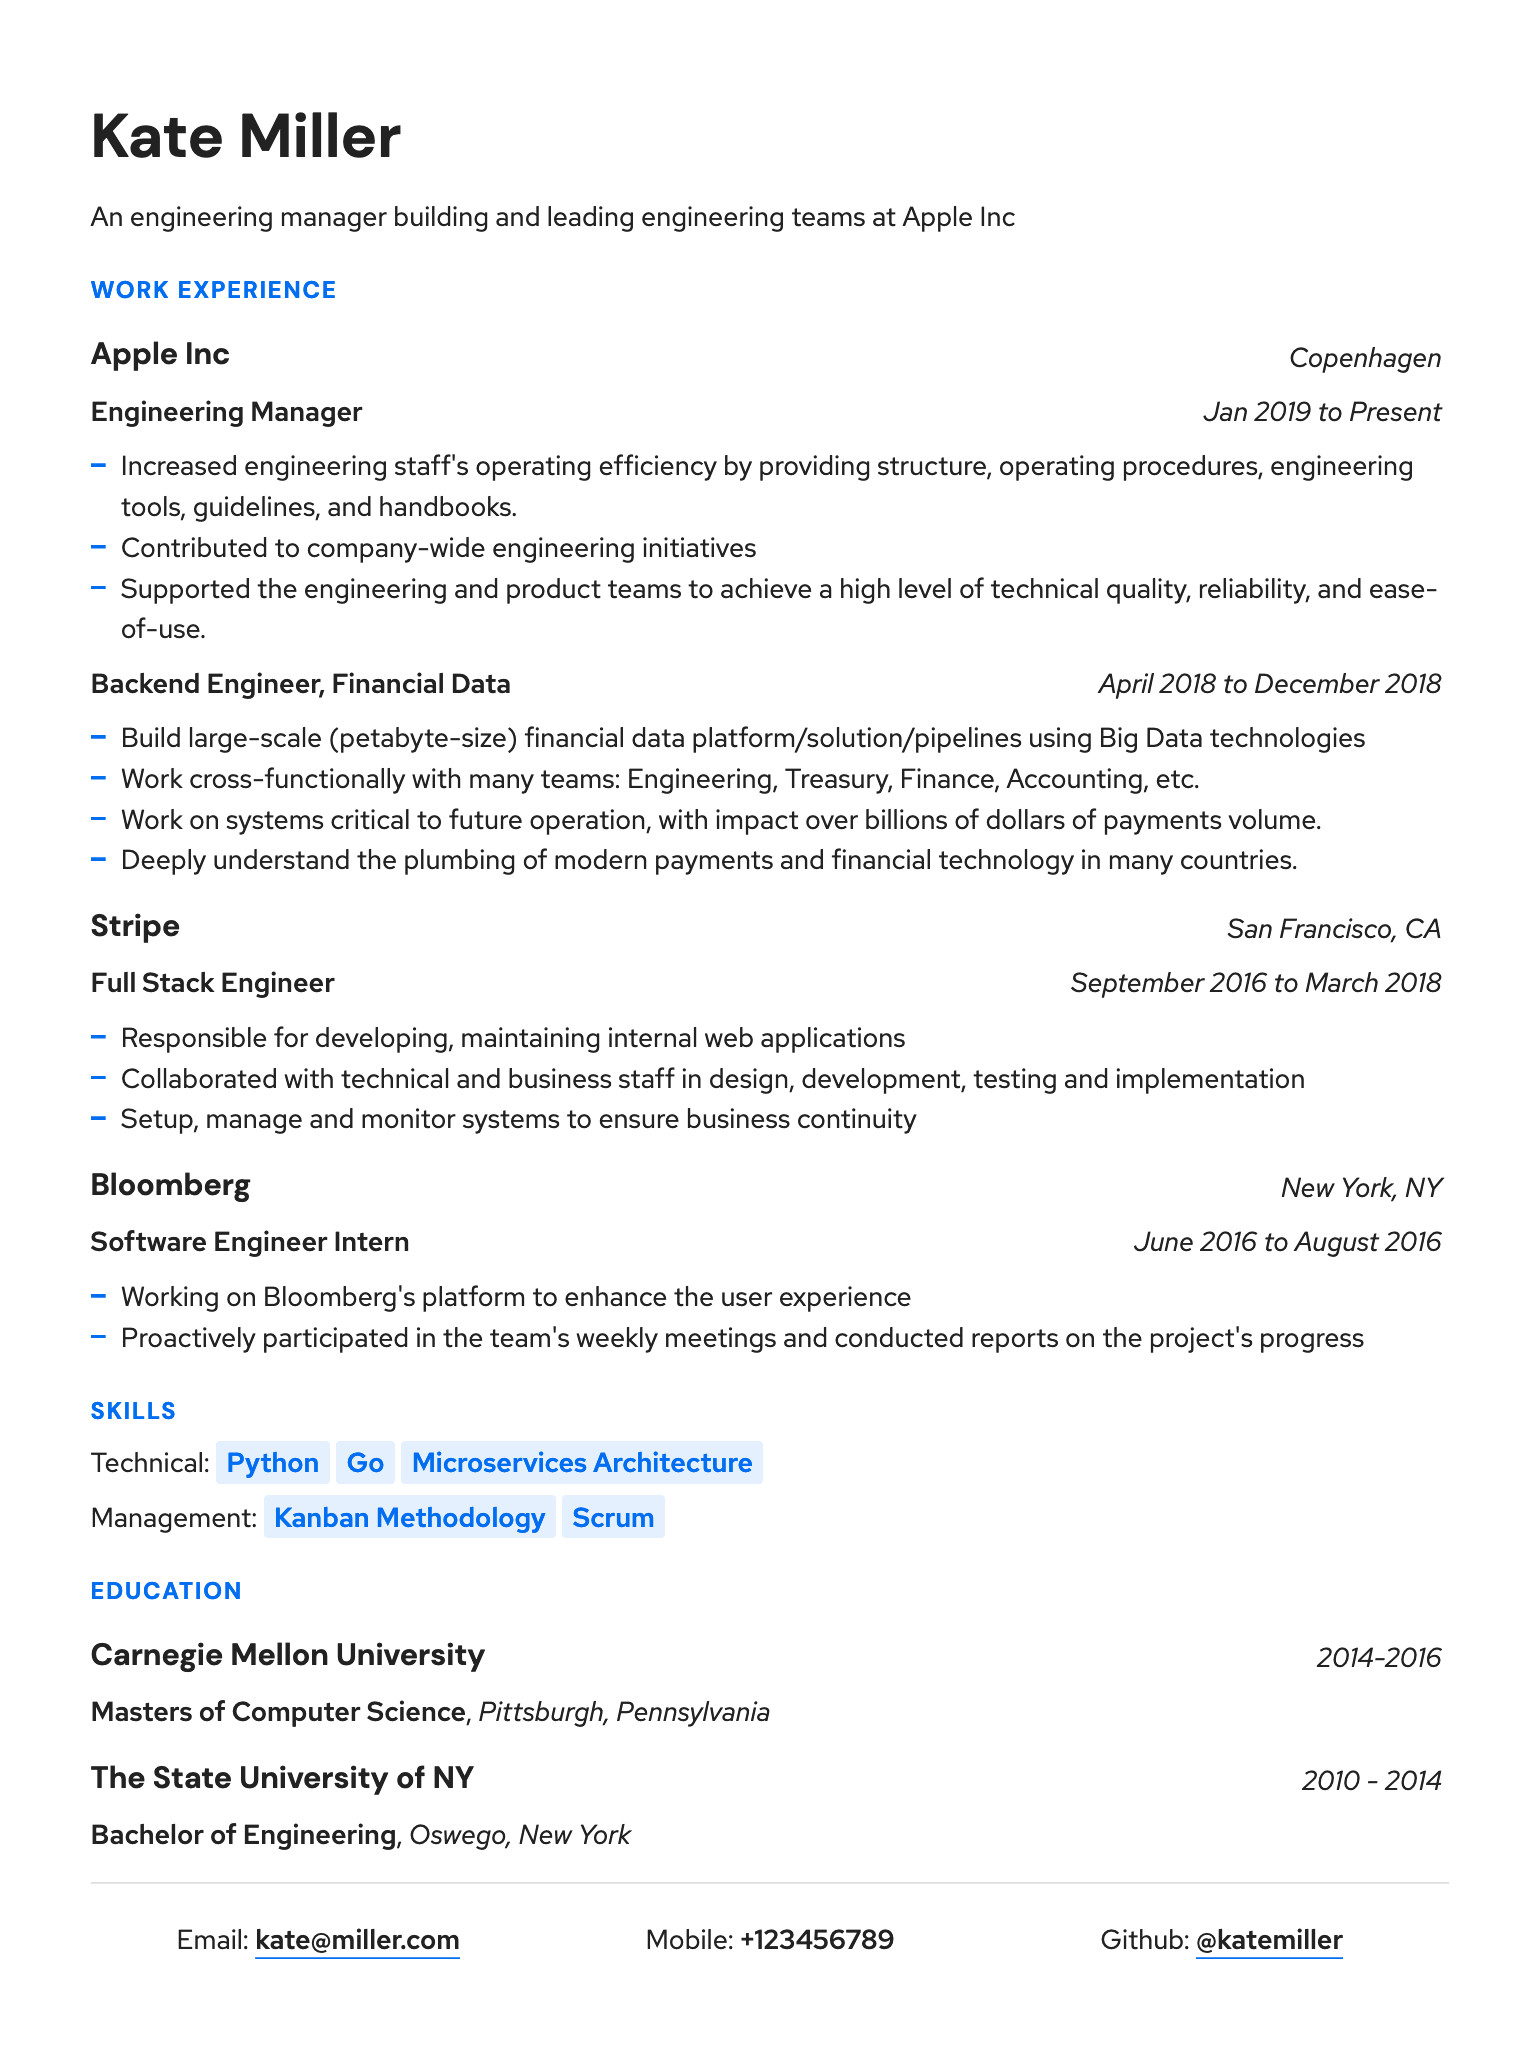 A resume with focus on work experience section